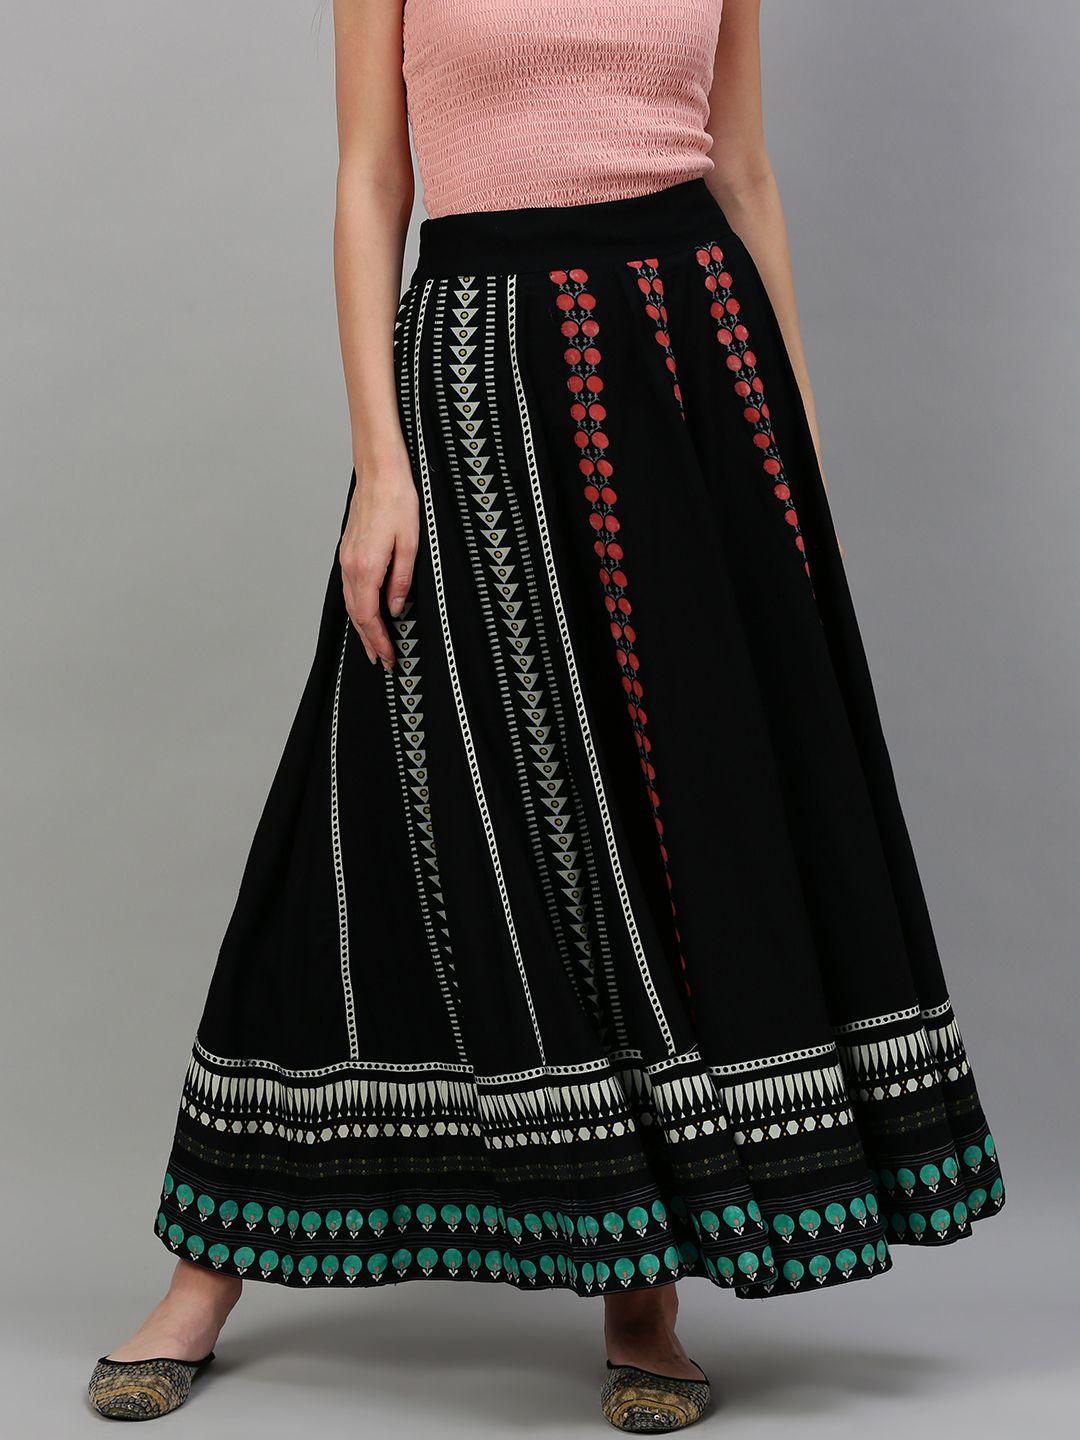 W Womans Black and White Ethnic Printed Skirt